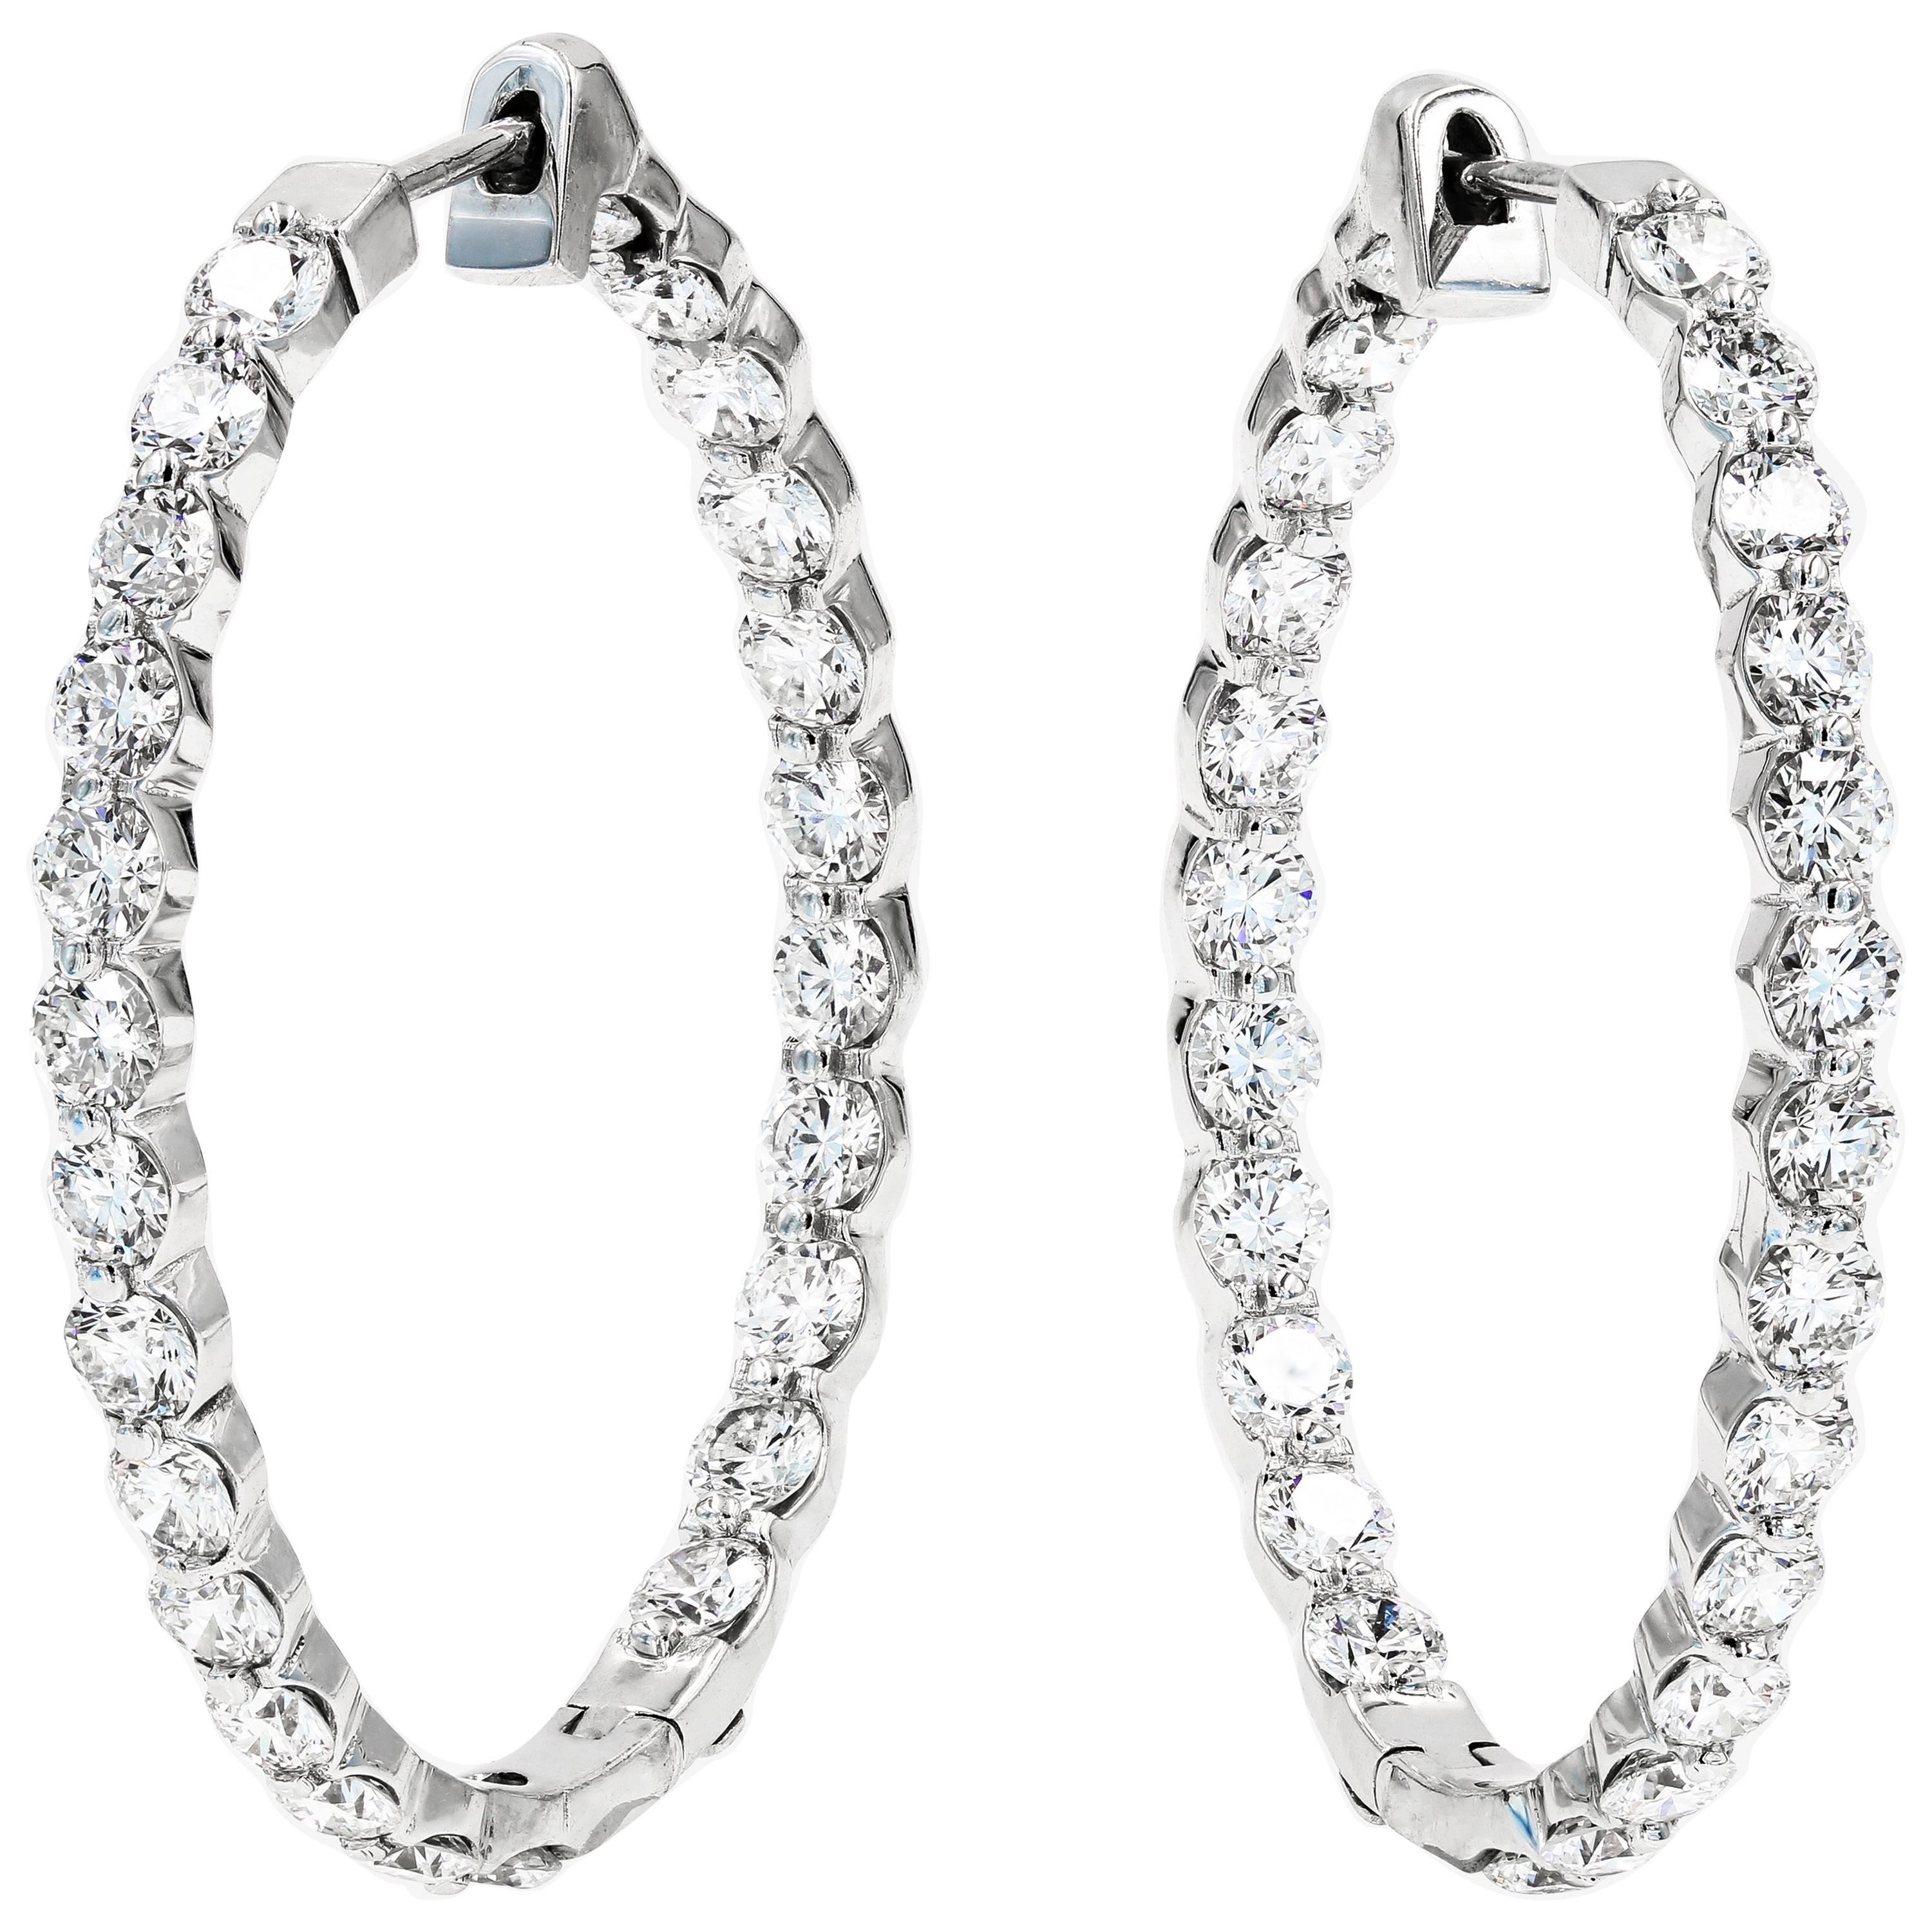 Large Diamond Hoop Earrings with Round Ideal Cut Diamonds in 18 Karat White Gold